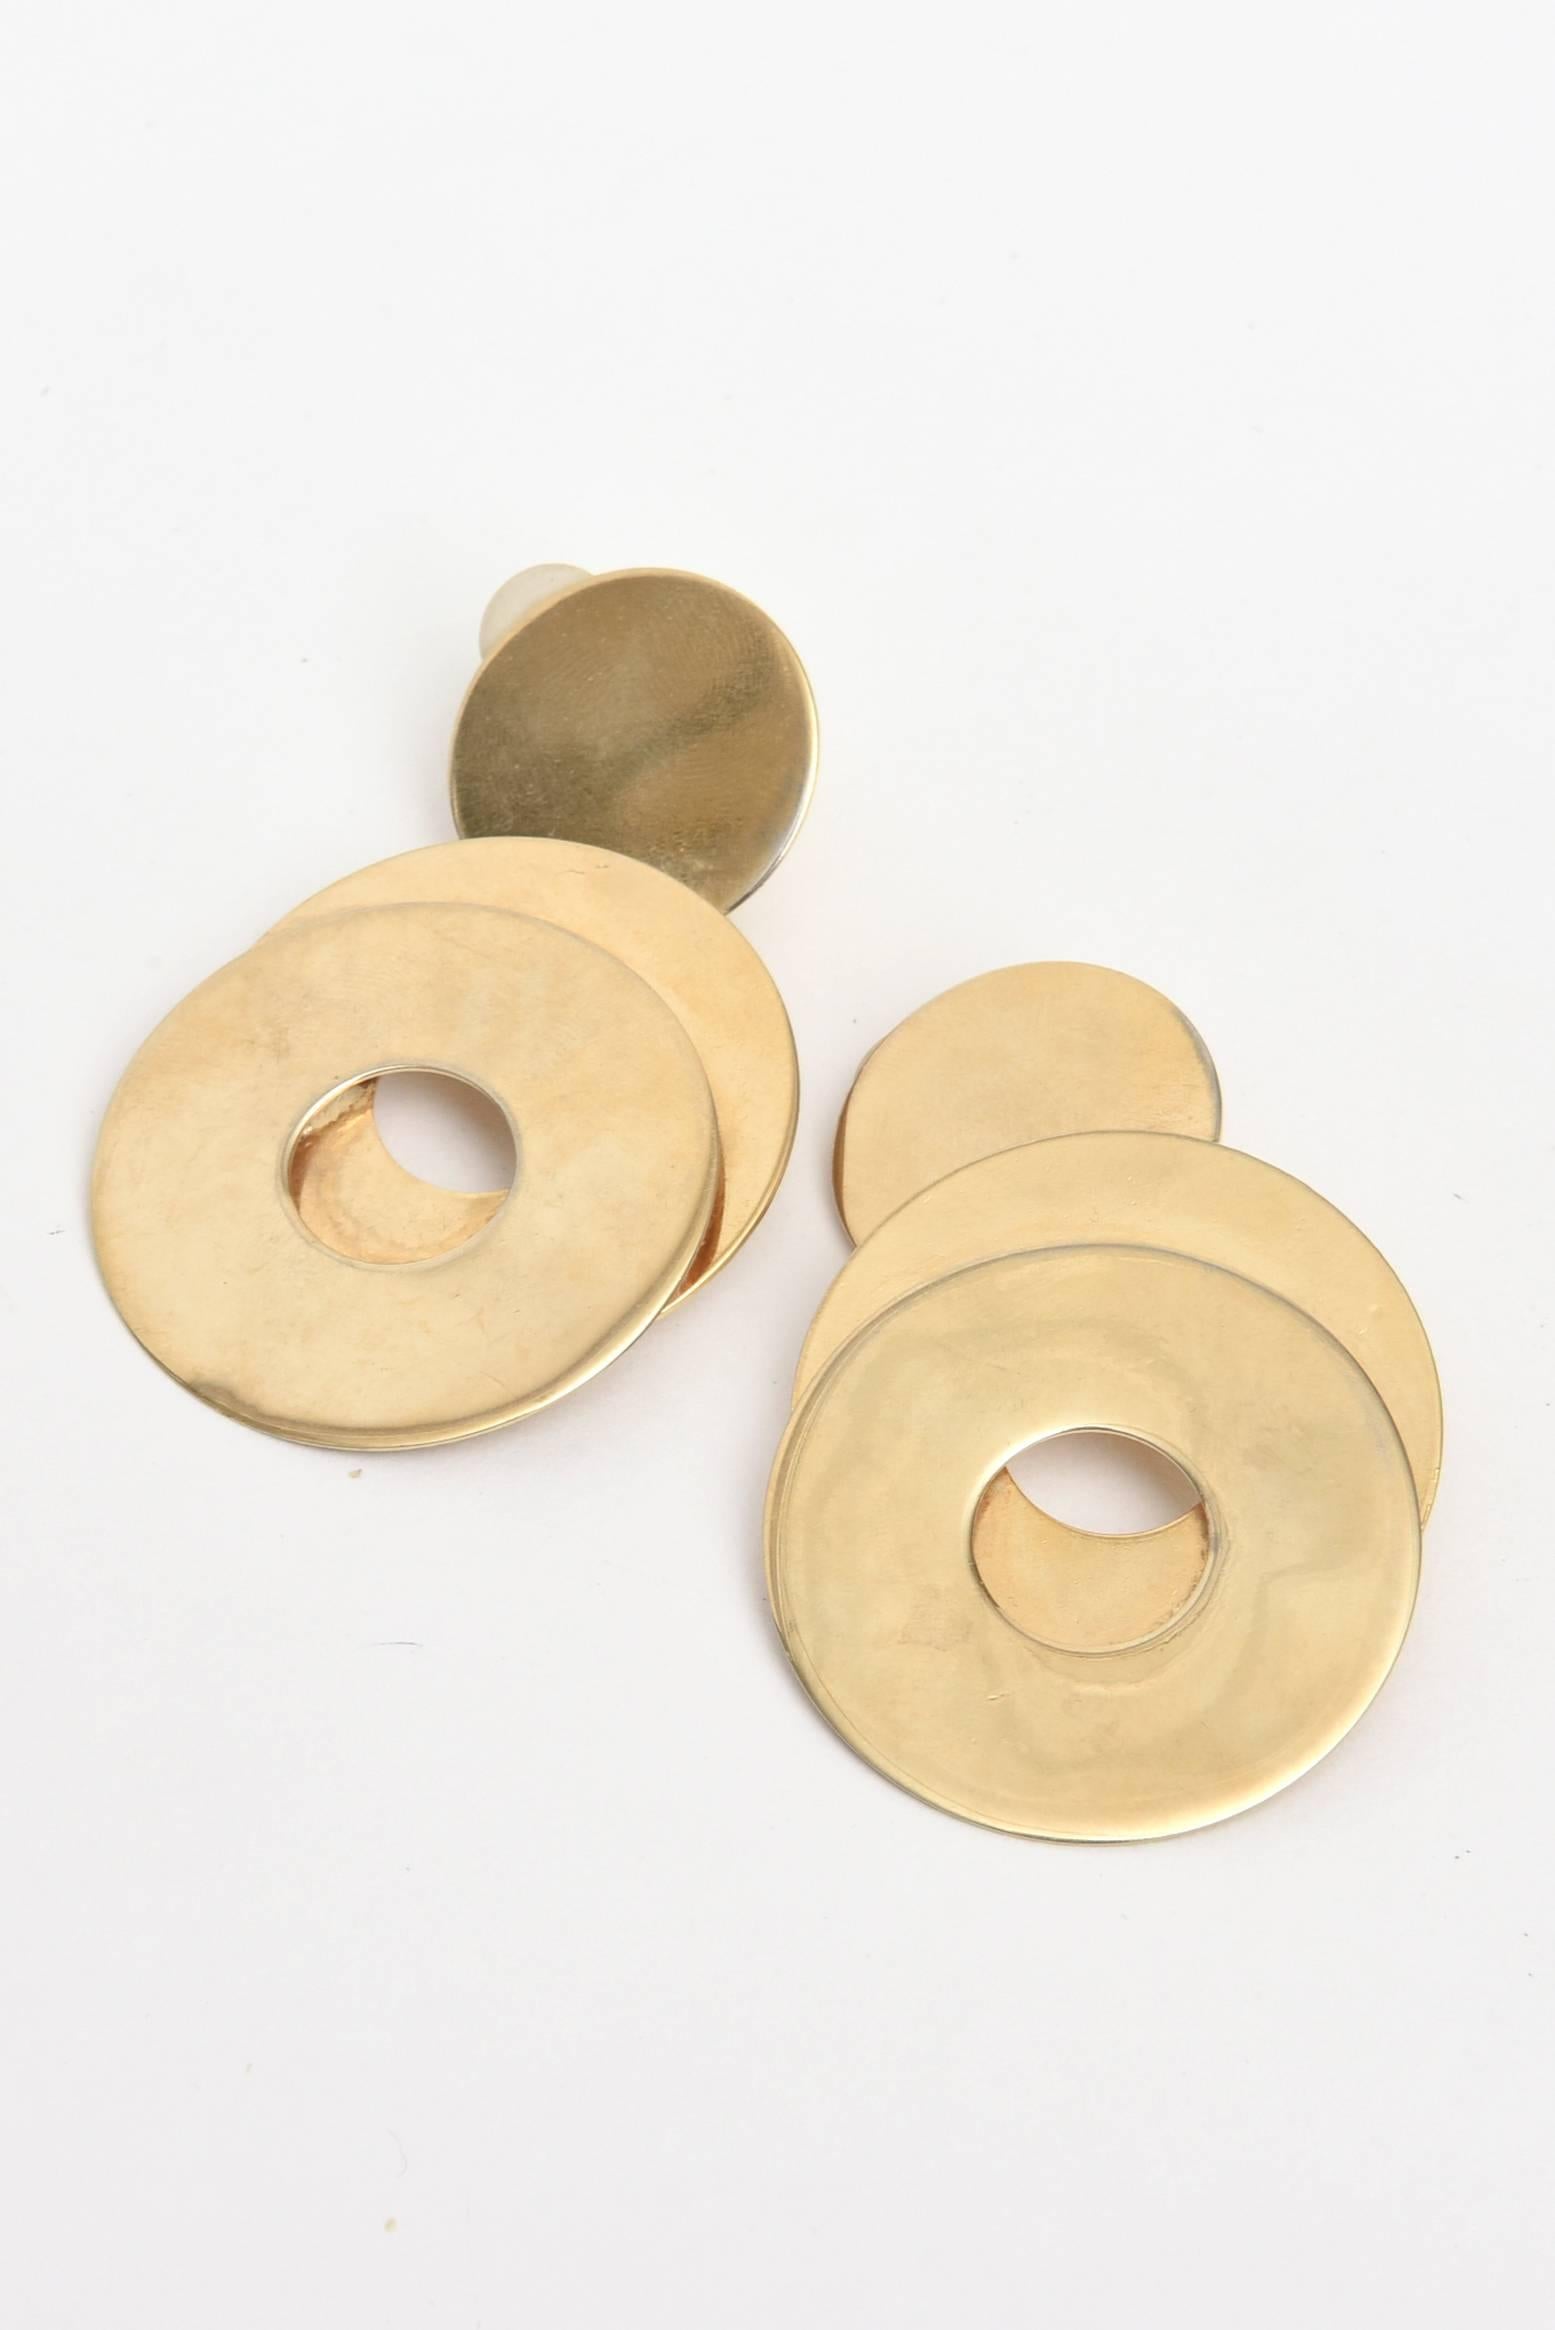 This great pair of gold plated sculptural 3 disk earrings are clip on's. They are very in vogue now and look great on the ear. These are form the 80's. Very au courant. and perfect for any season day or evening.
PLEASE NOTE: THESE ARE NOW ON SALE